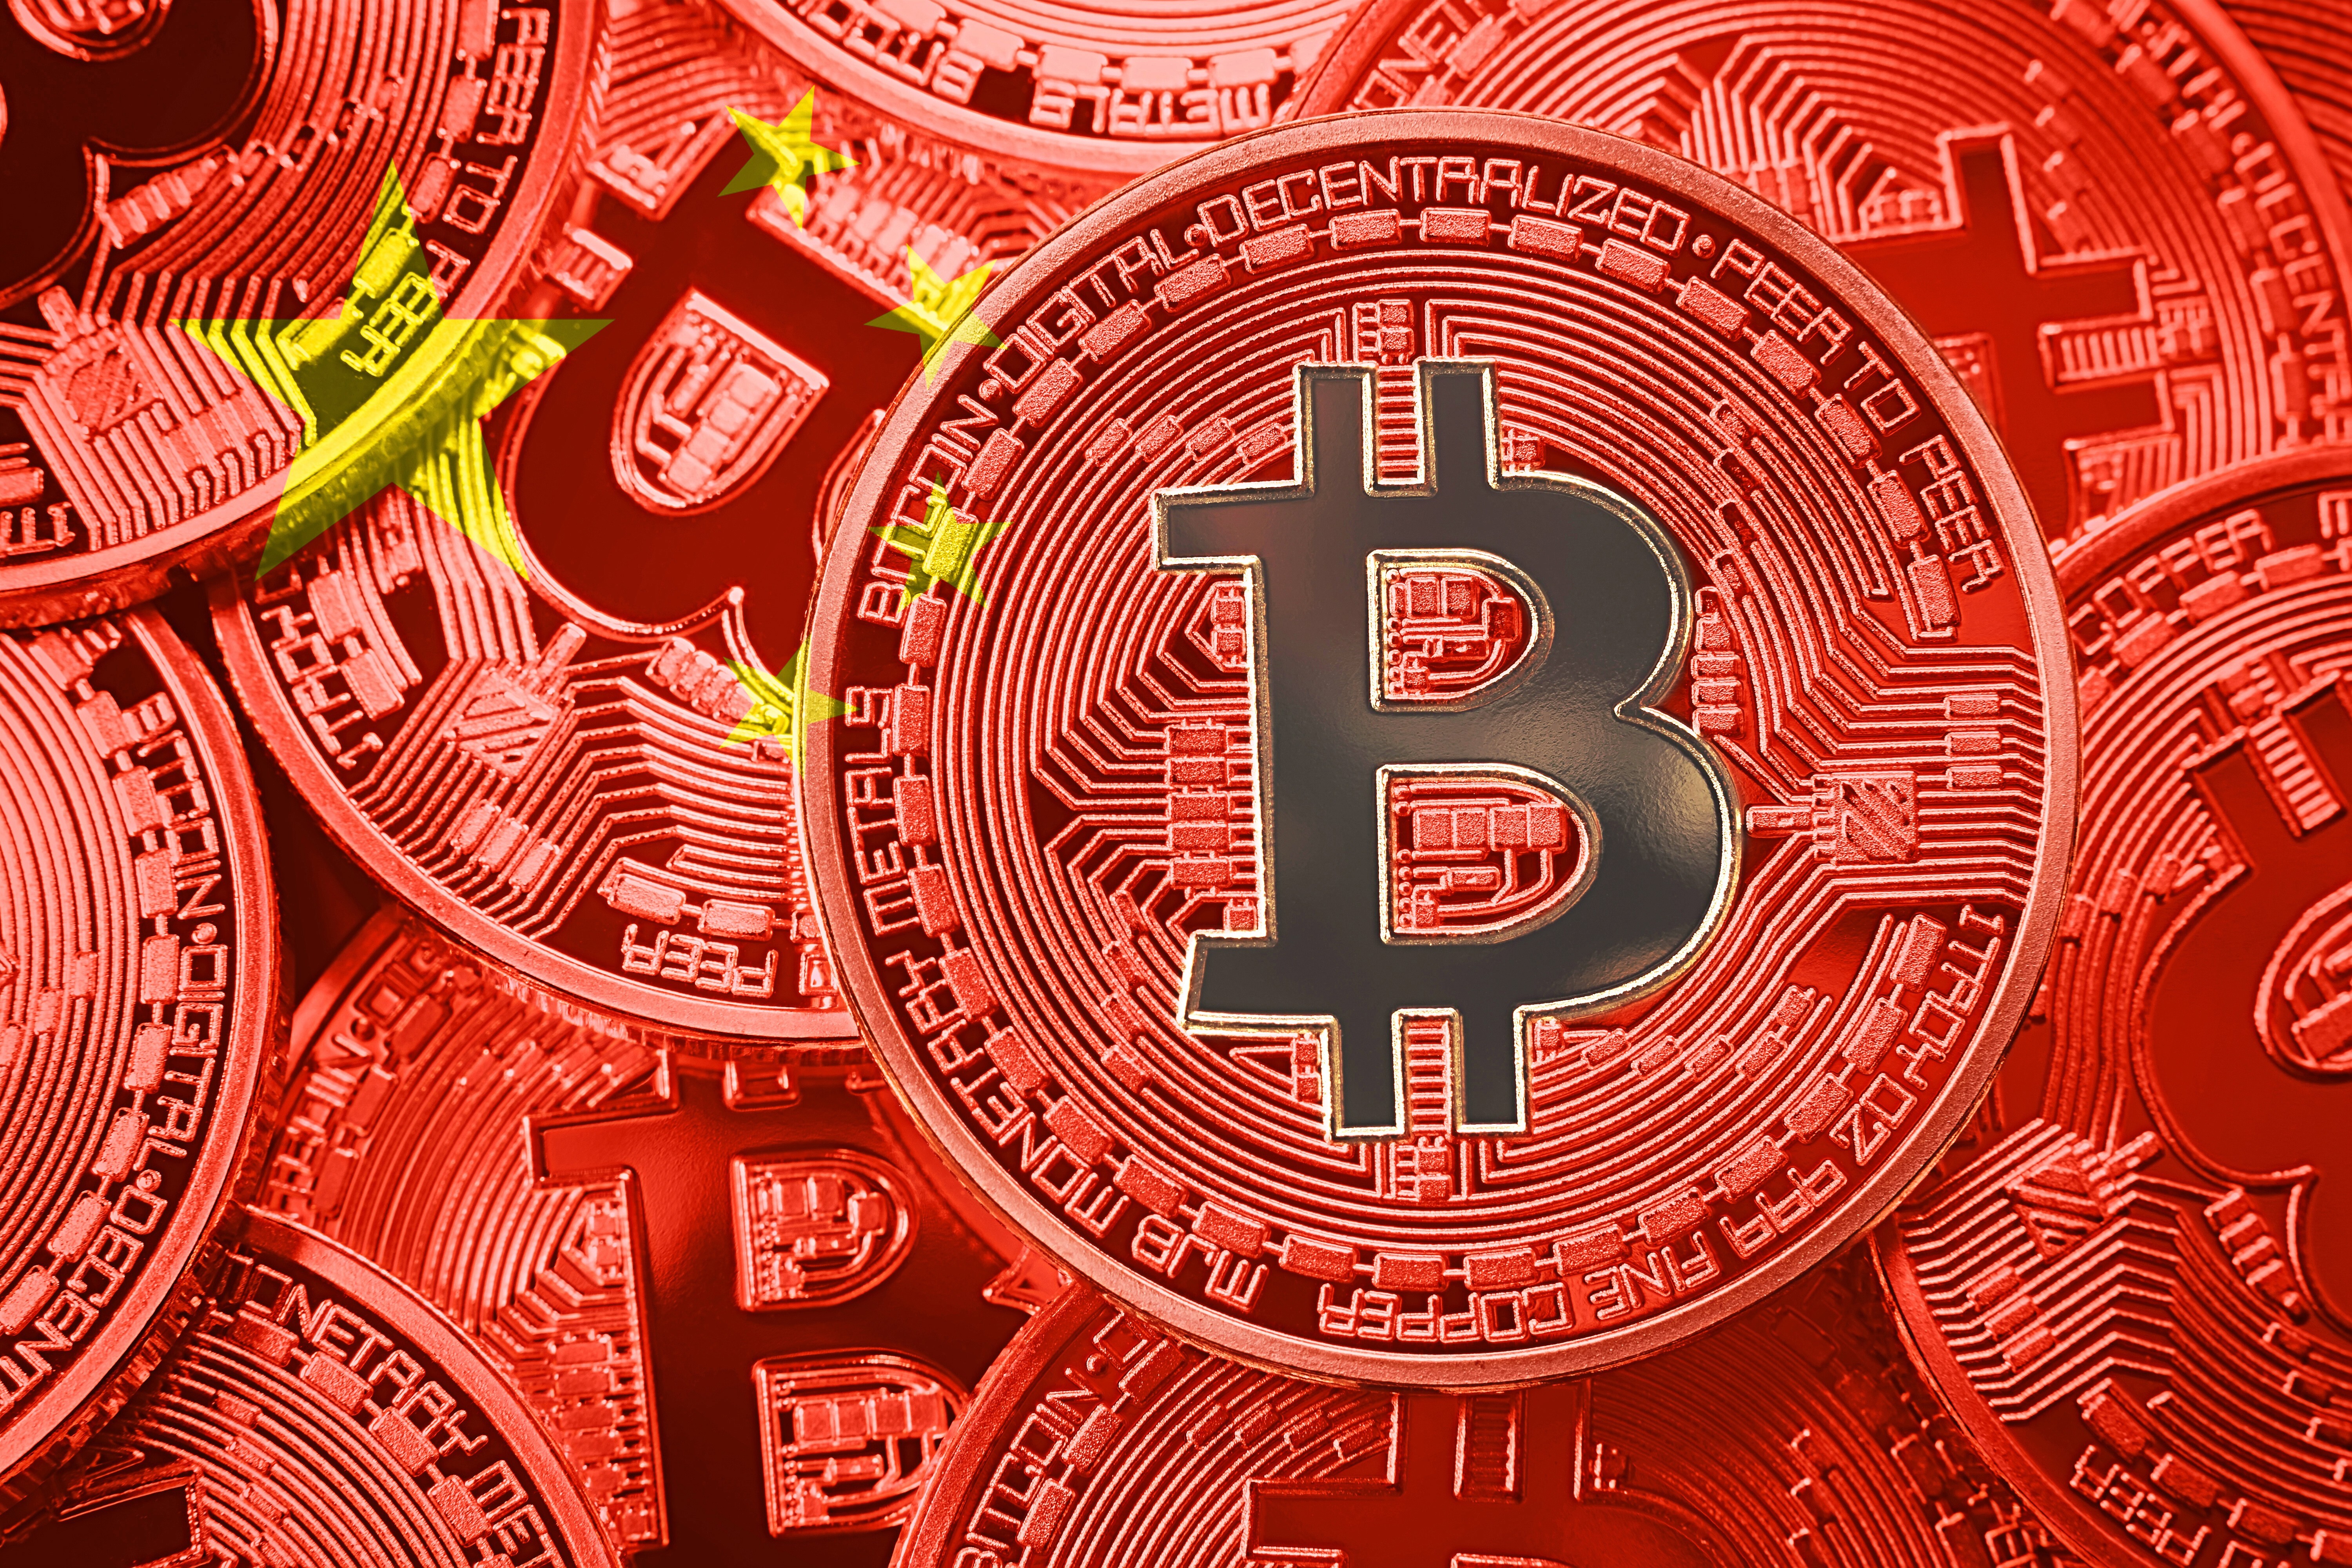 Mu Changchun, the head of the People’s Bank of China’s digital currency research institute, said China’s new digital currency was different to bitcoin. Photo: Shutterstock